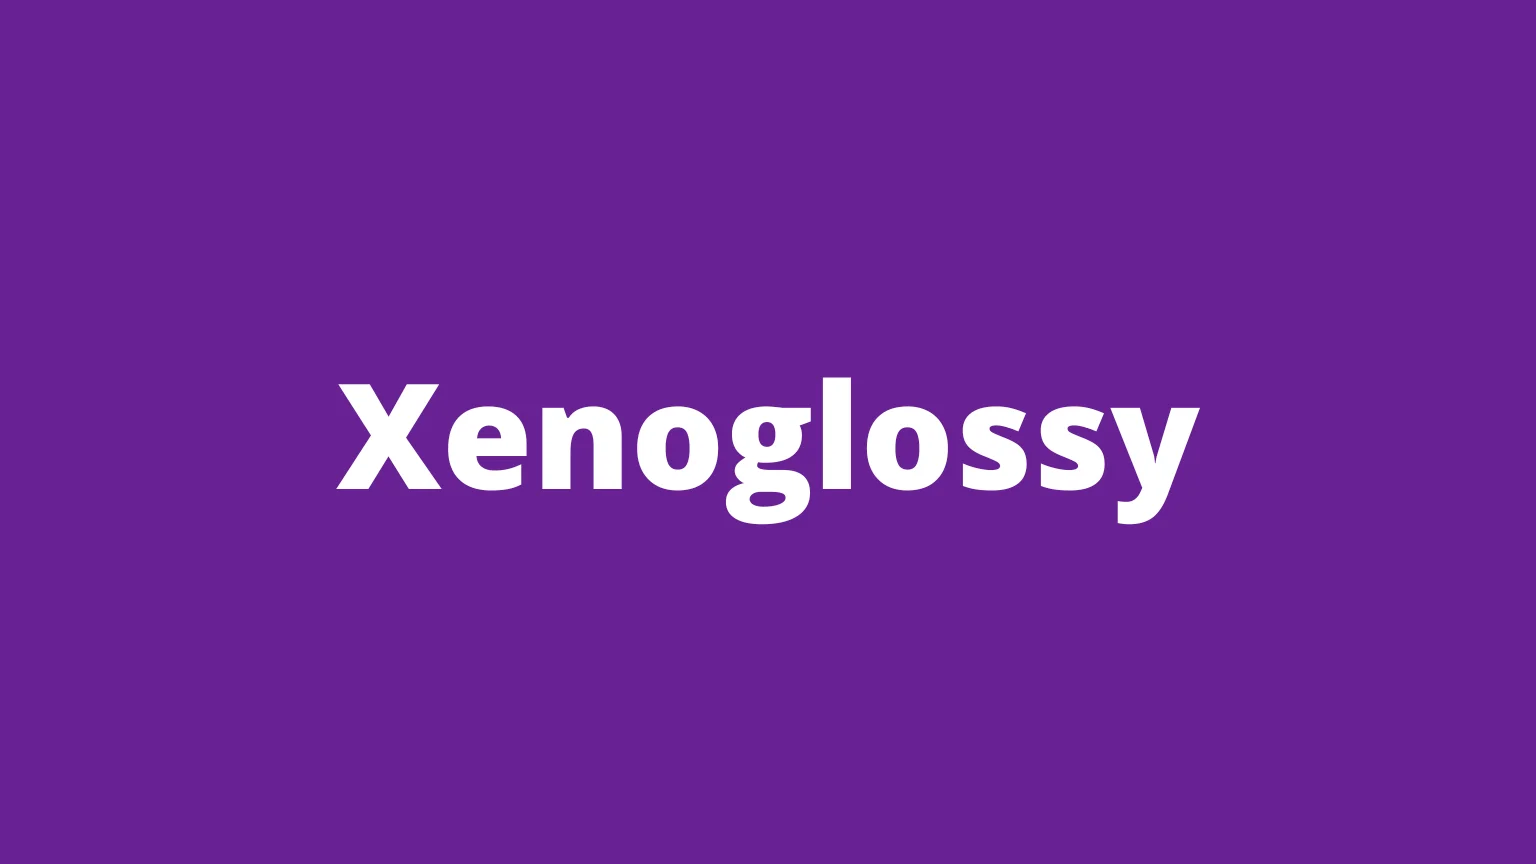 The word xenoglossy and its meaning